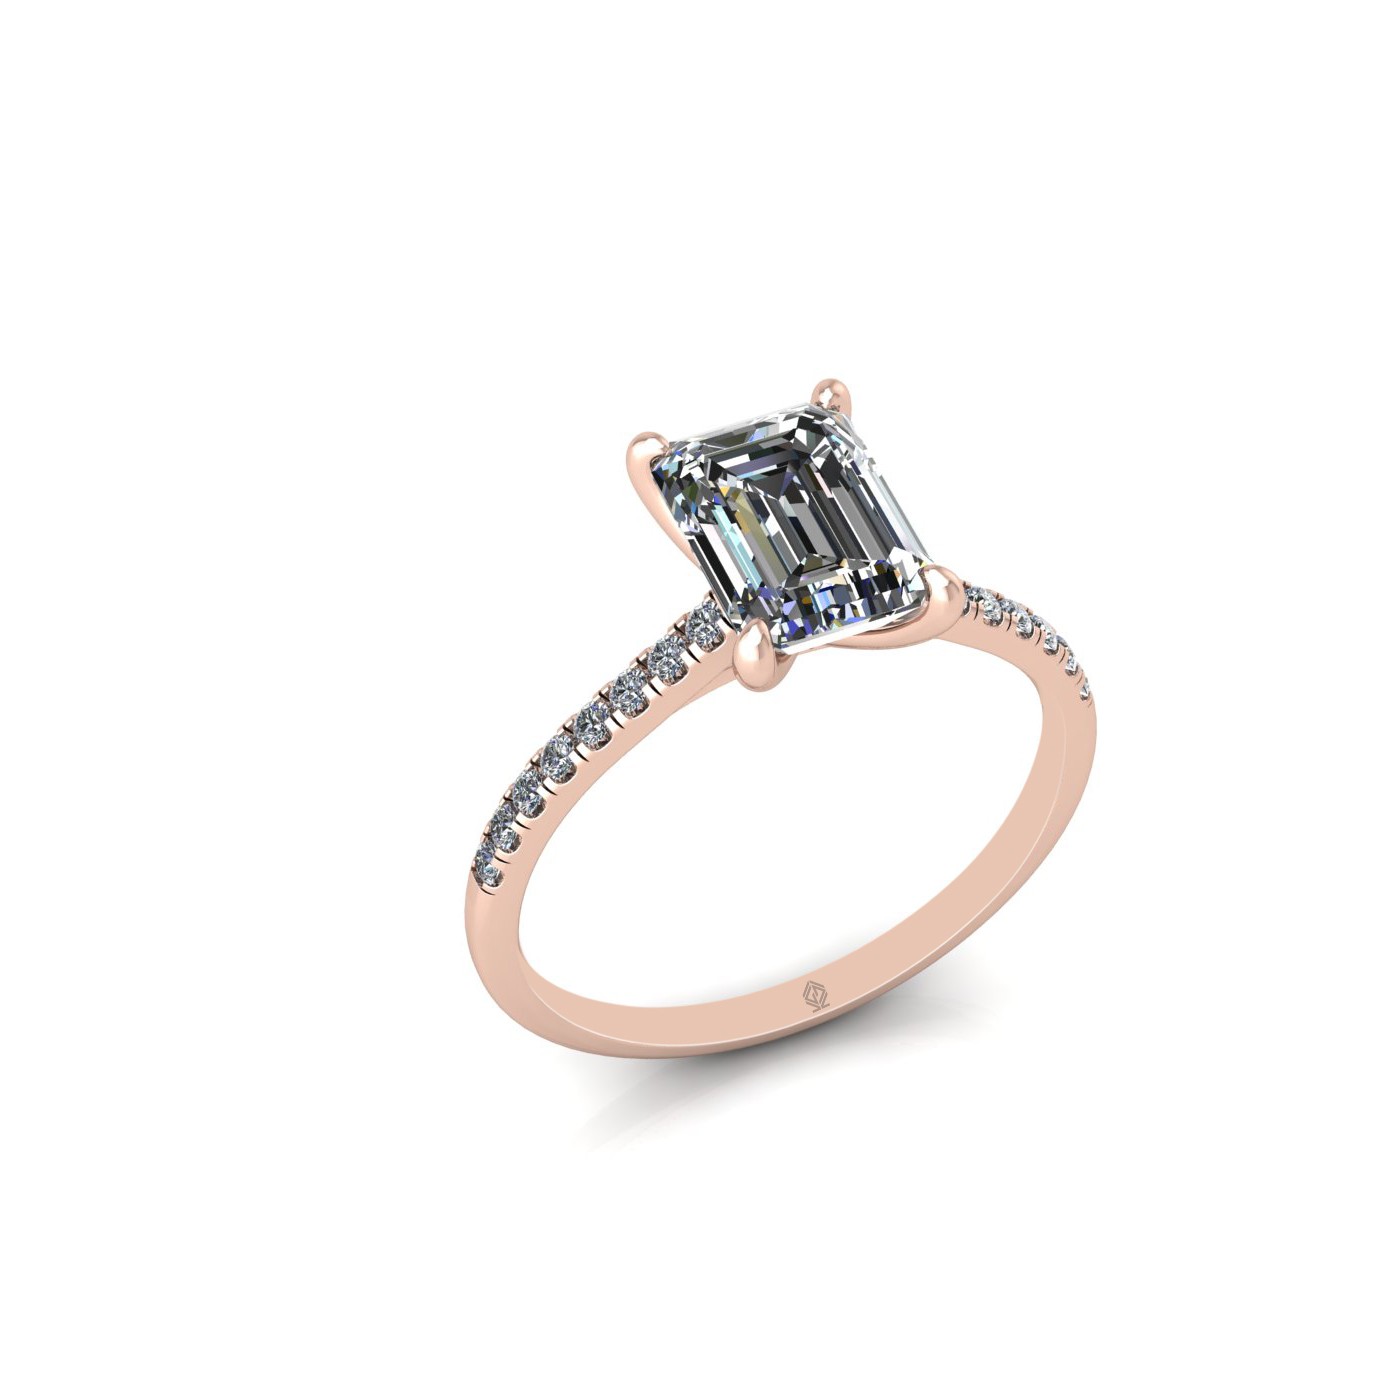 18k rose gold 1.5ct 4 prongs emerald cut diamond engagement ring with whisper thin pavÉ set band